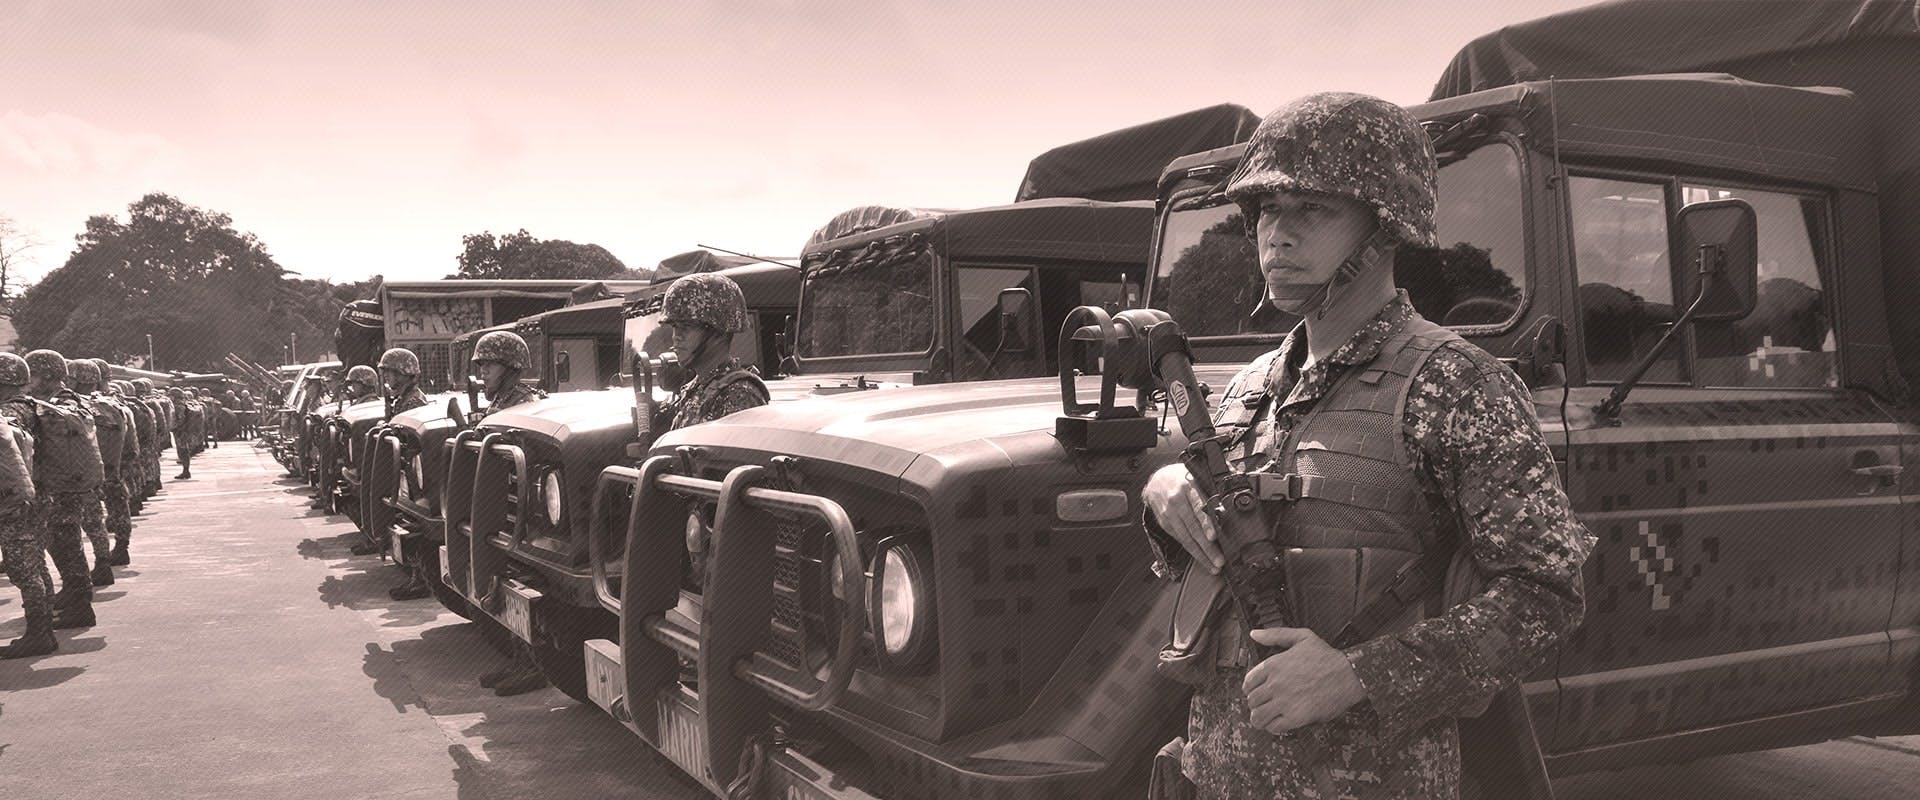 A grayscale photograph of a line of military personnel standing next to armored vehicles. The soldier in the foreground, wearing a camouflaged uniform and helmet, holds a communication device. Behind him, rows of soldiers stand at attention, and multiple military vehicles are parked, all under a partly cloudy sky.